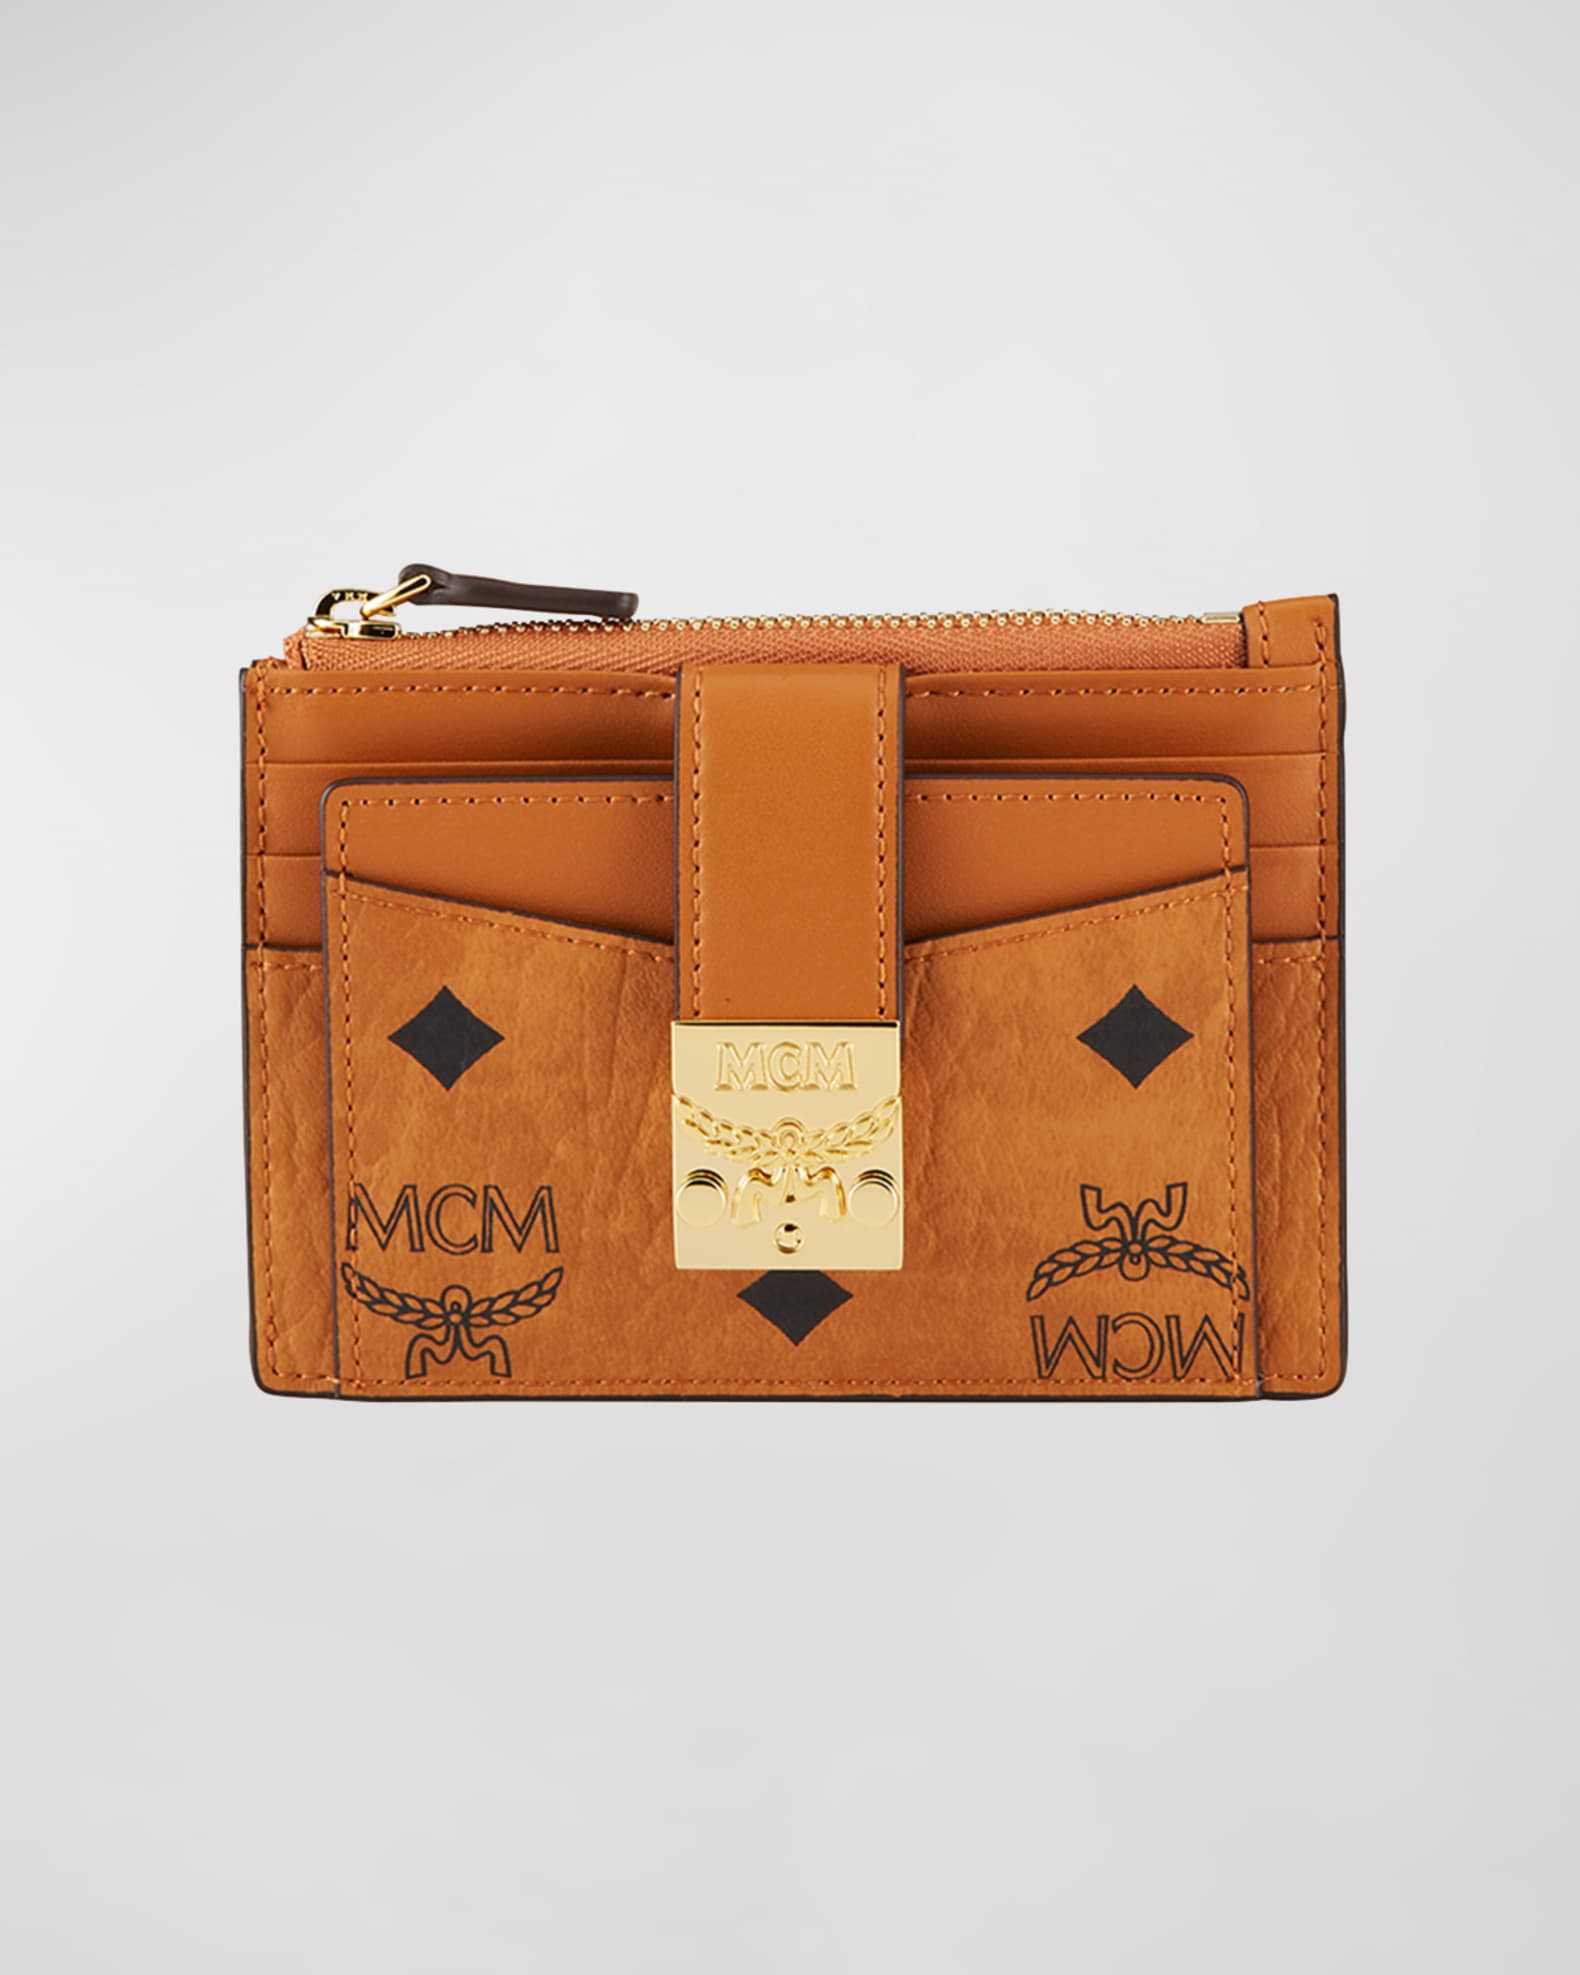 Weekly Obsessions: MCM Patricia Satchel, Chloe Sneakers, and more